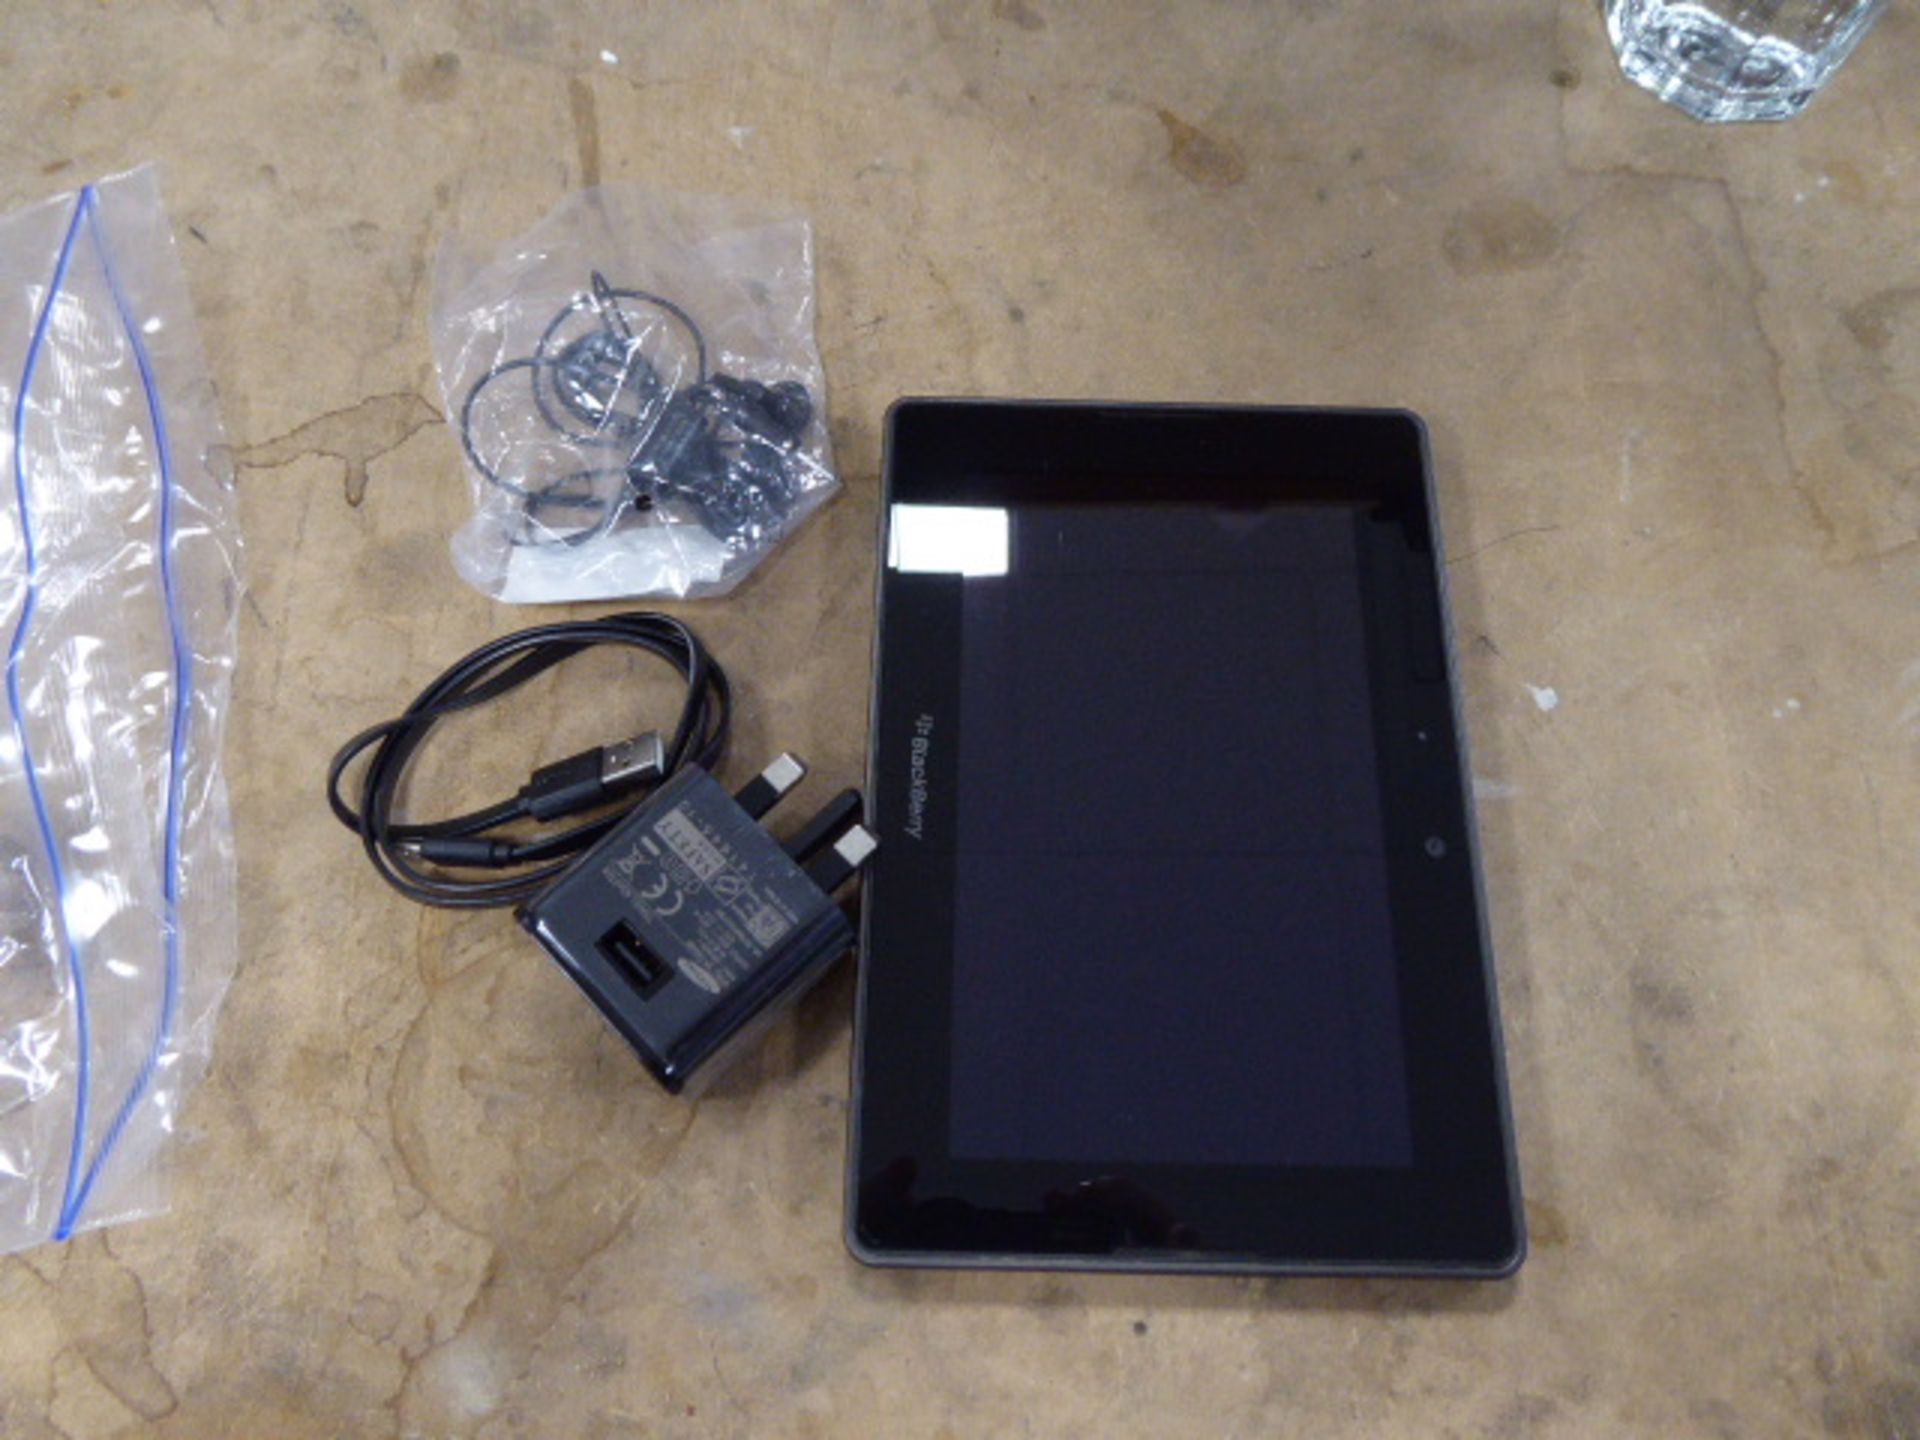 Blackberry Playbook tablet with replacement power supply